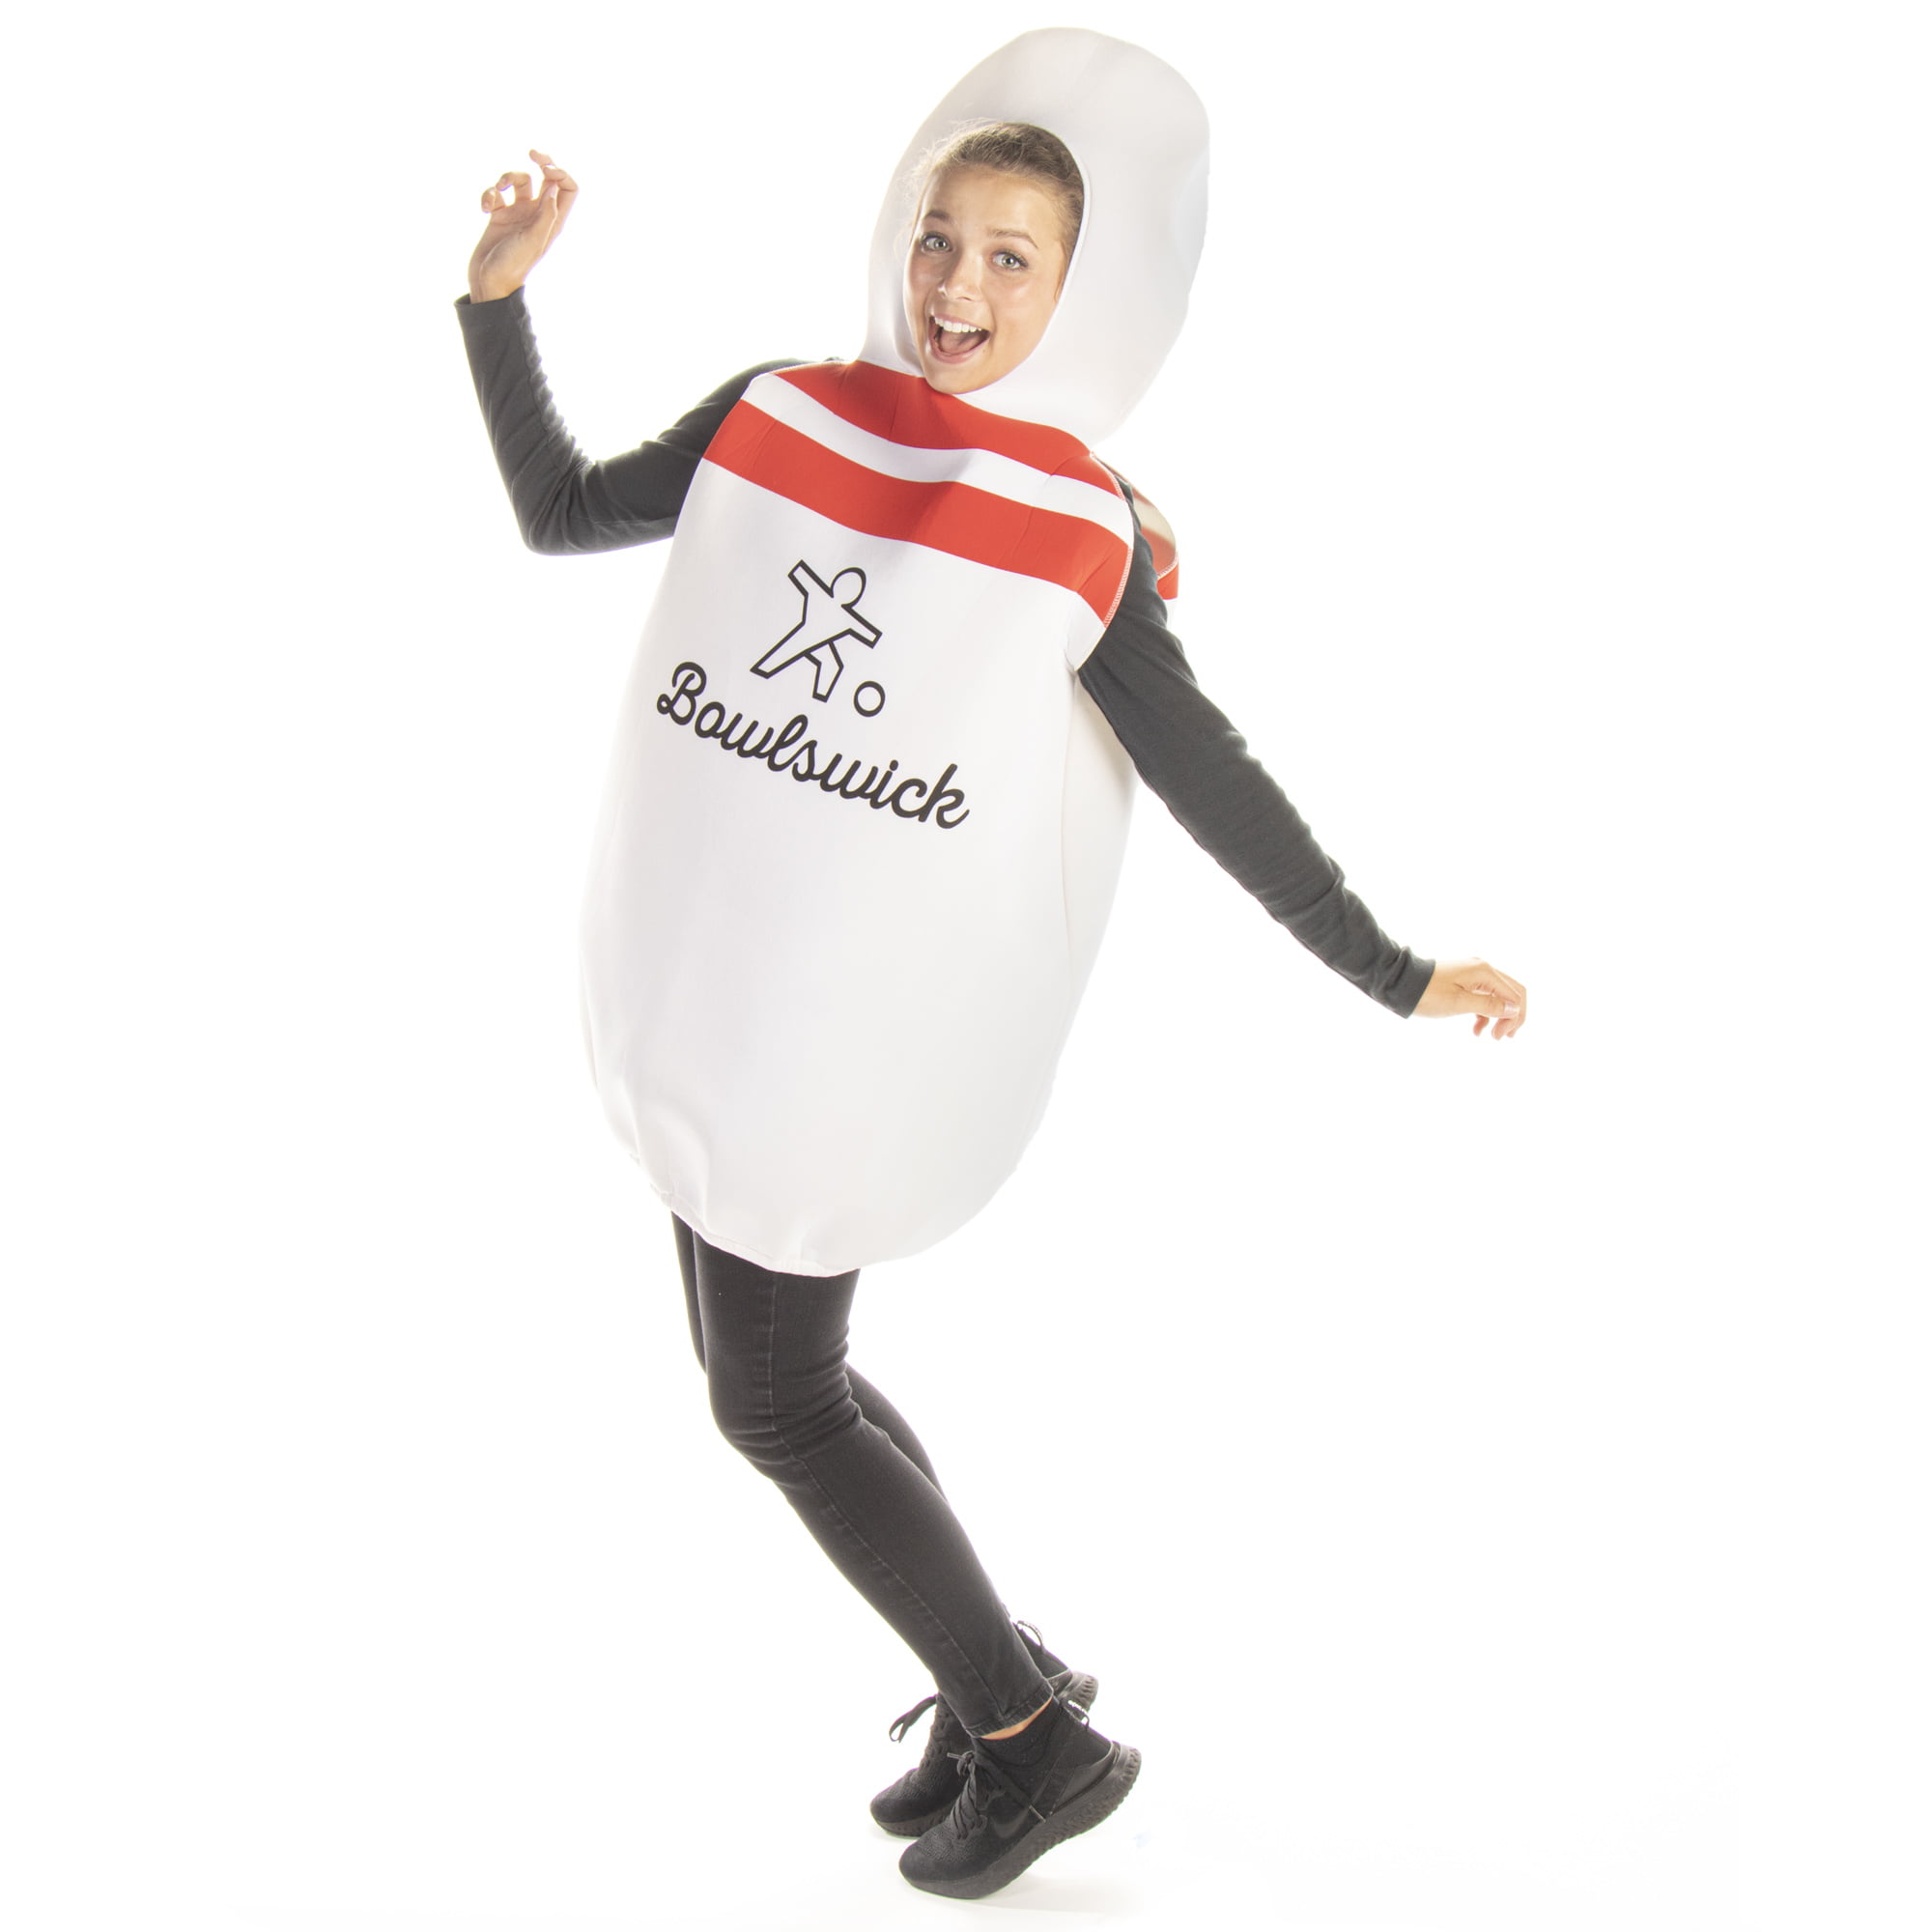 One-Size Funny Bowl Sports Costumes for Adults Bowling Pin Halloween Costume 